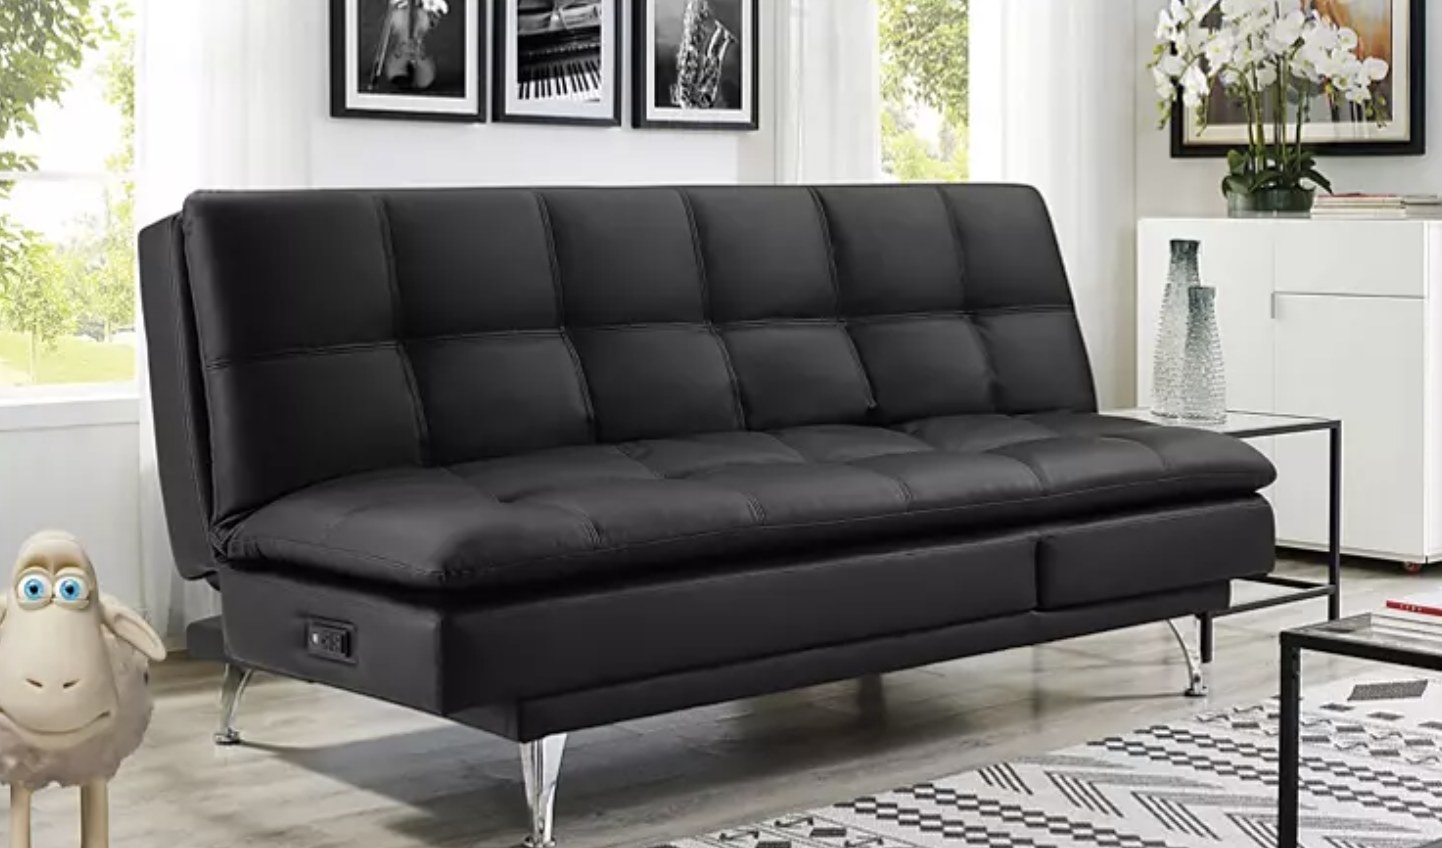 If You Re Looking For A New Couch Here